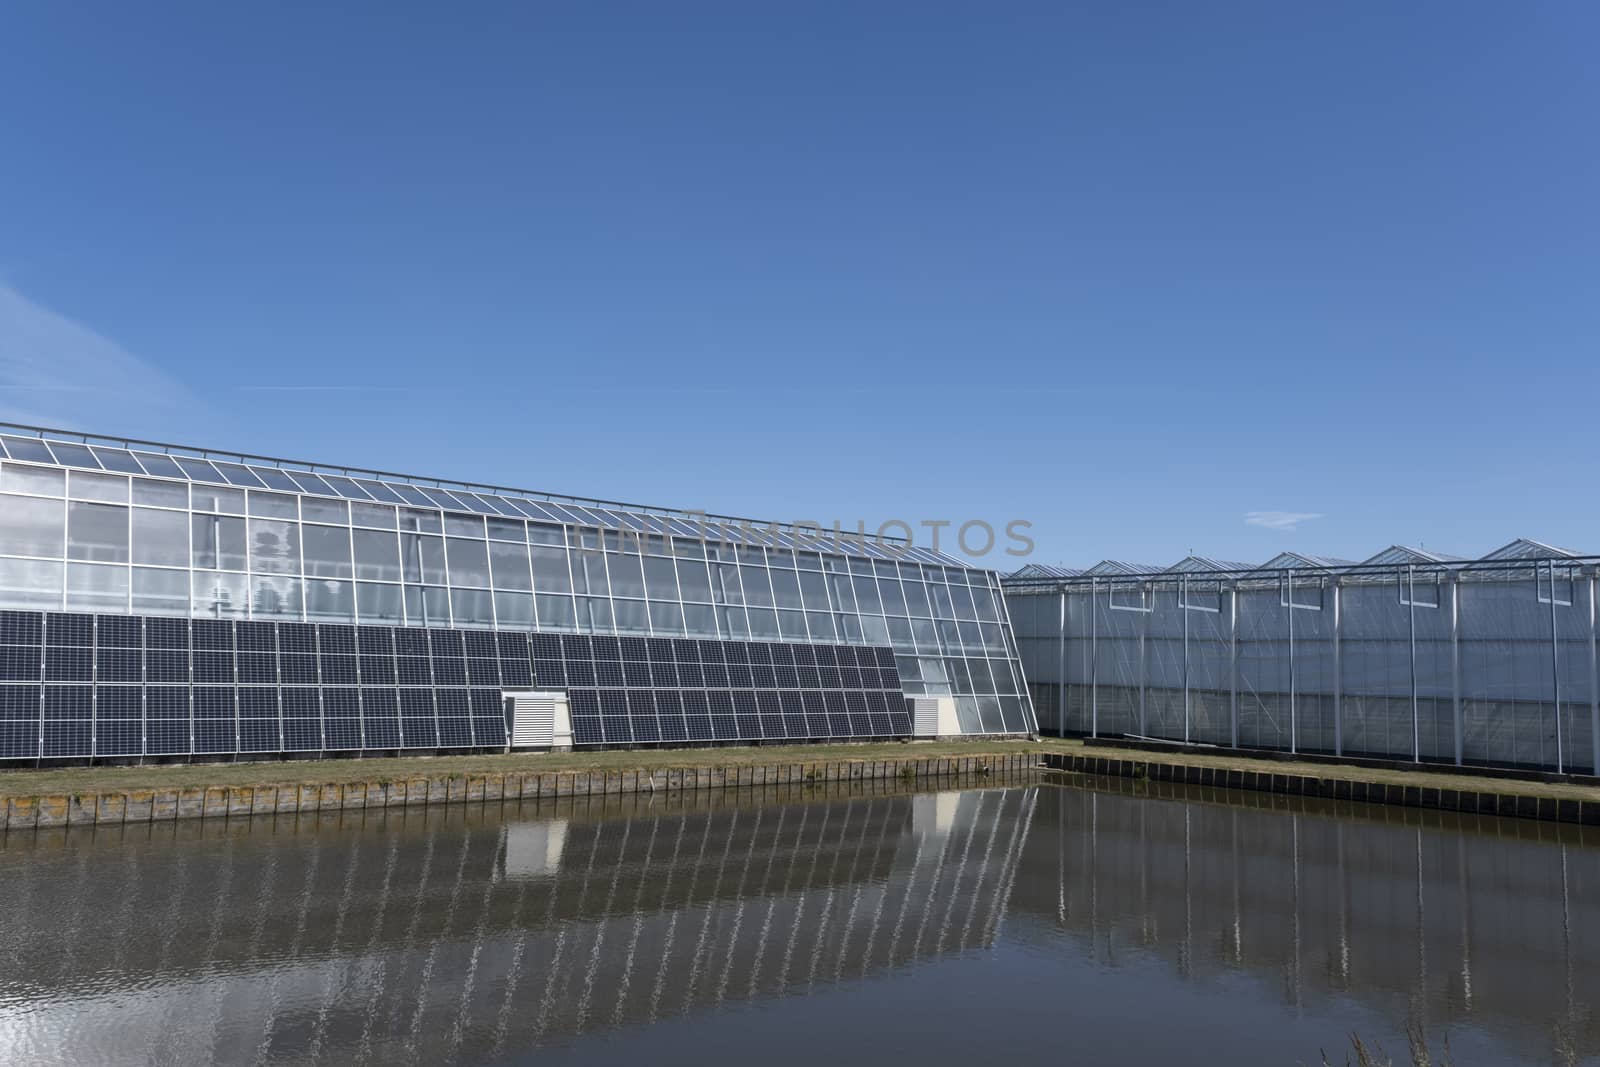 Great tomato nursery and greenhouse with summer sky by Tjeerdkruse